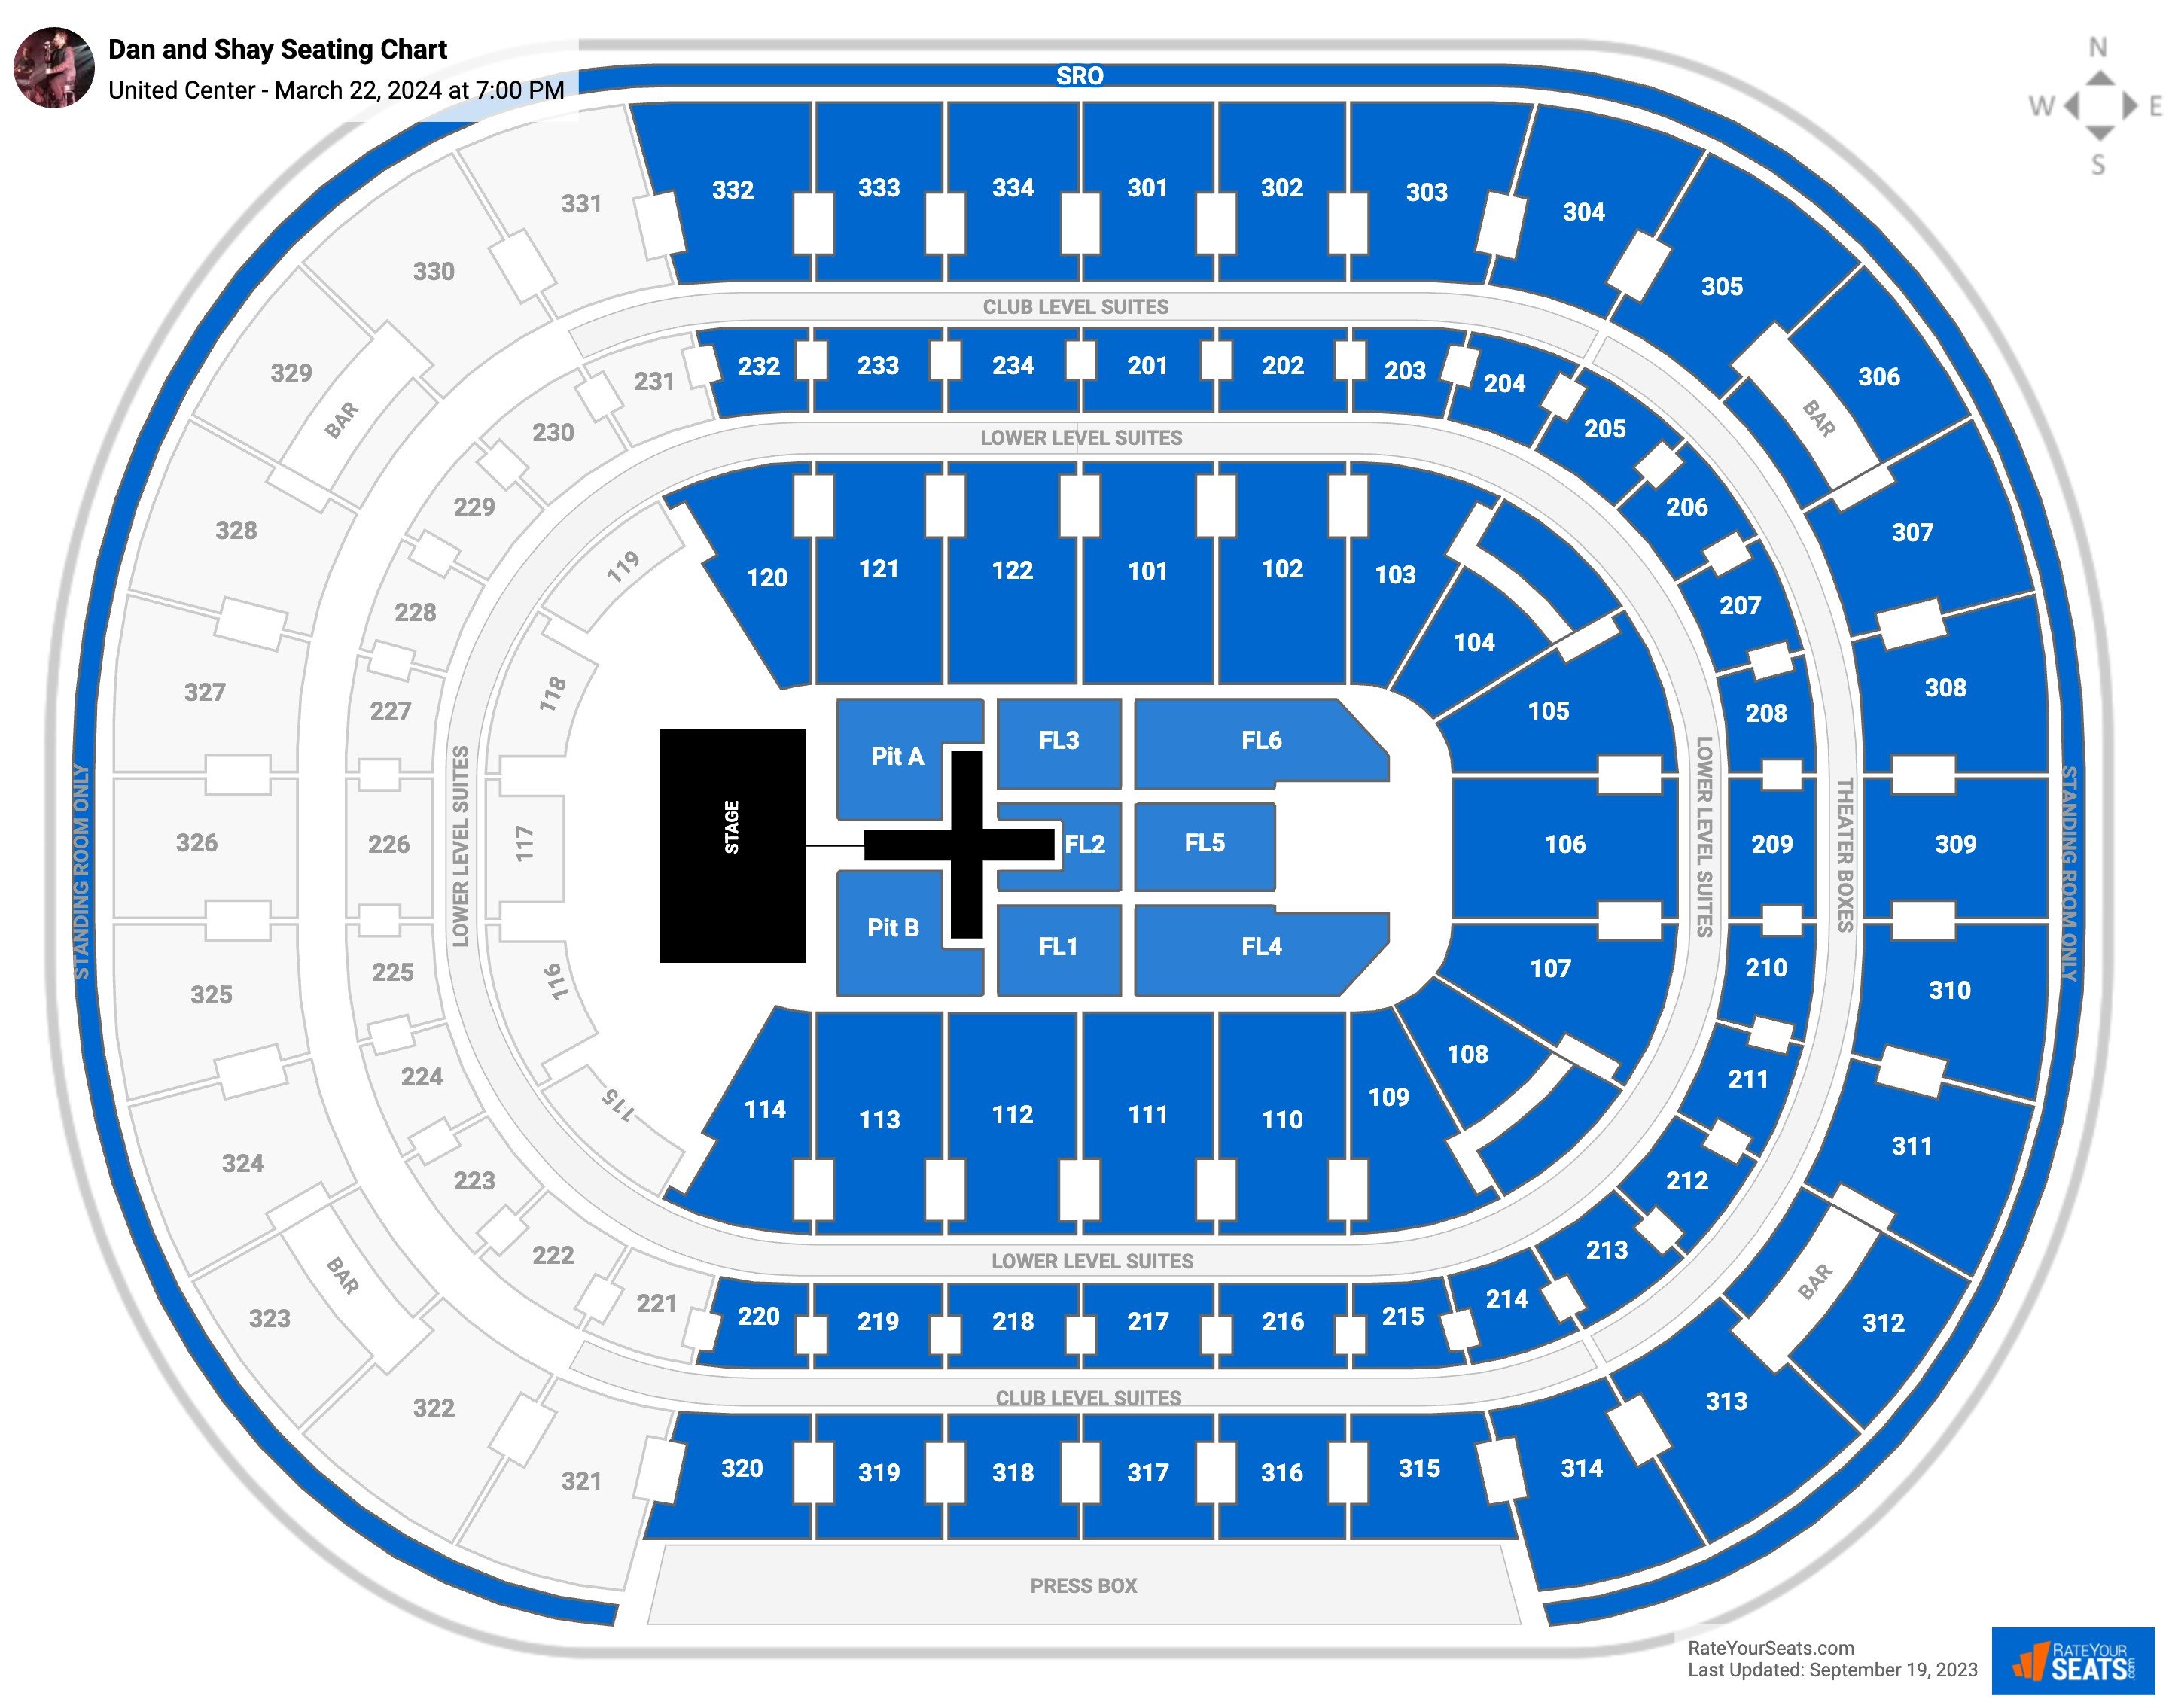 Dan and Shay seating chart United Center